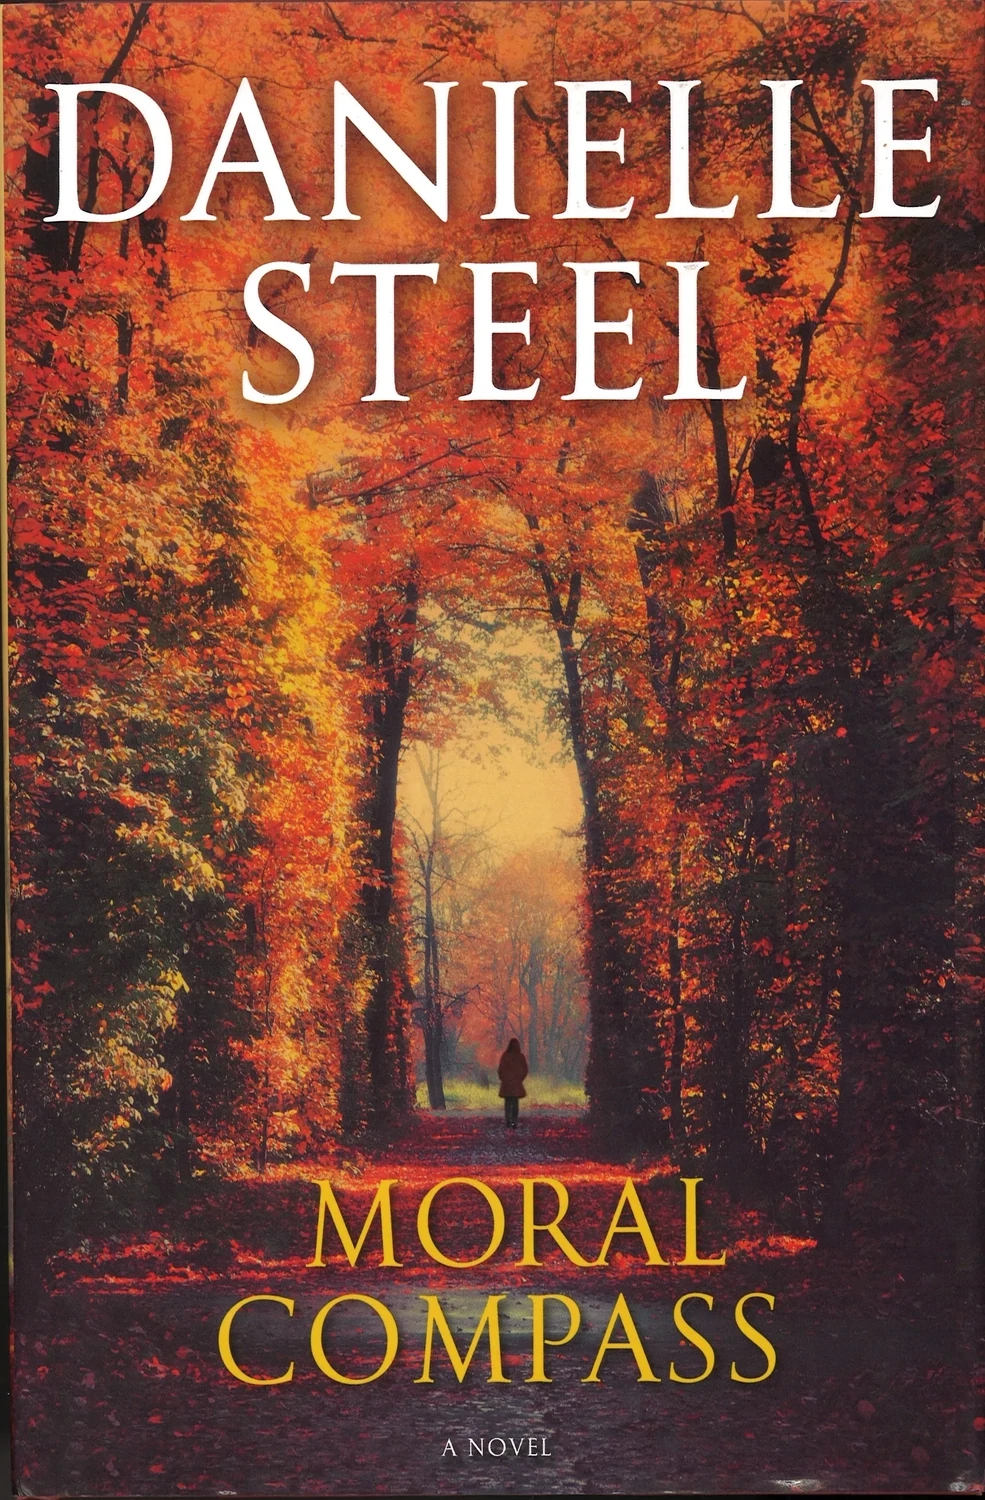 Moral Compass by Danielle Steel